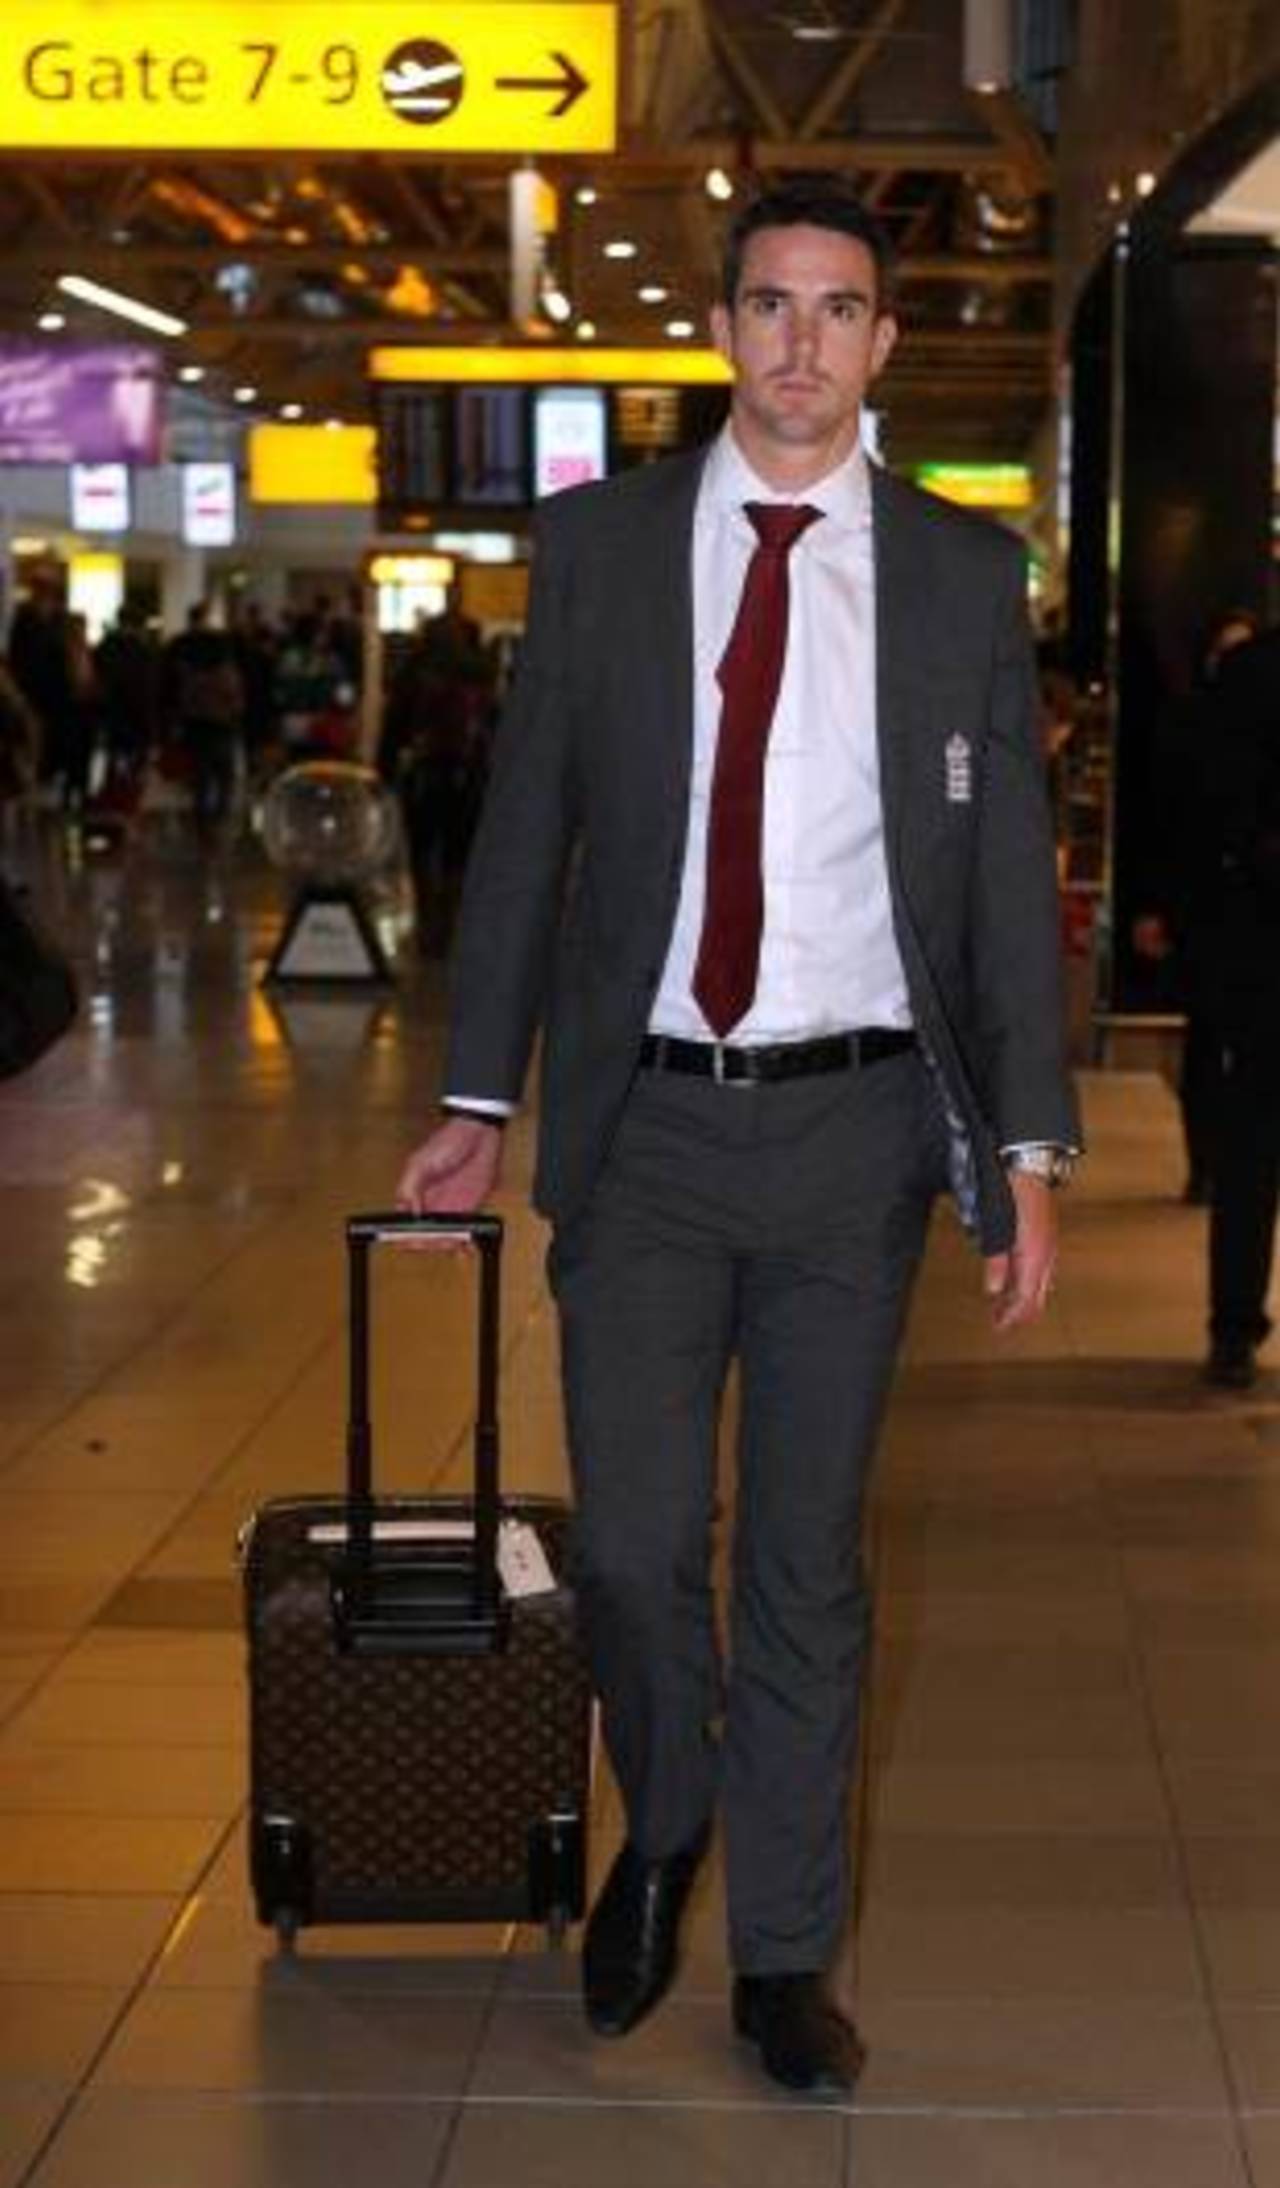 Kevin Pietersen was looking serious as he resumed the touring life, Heathrow, January 2, 2012